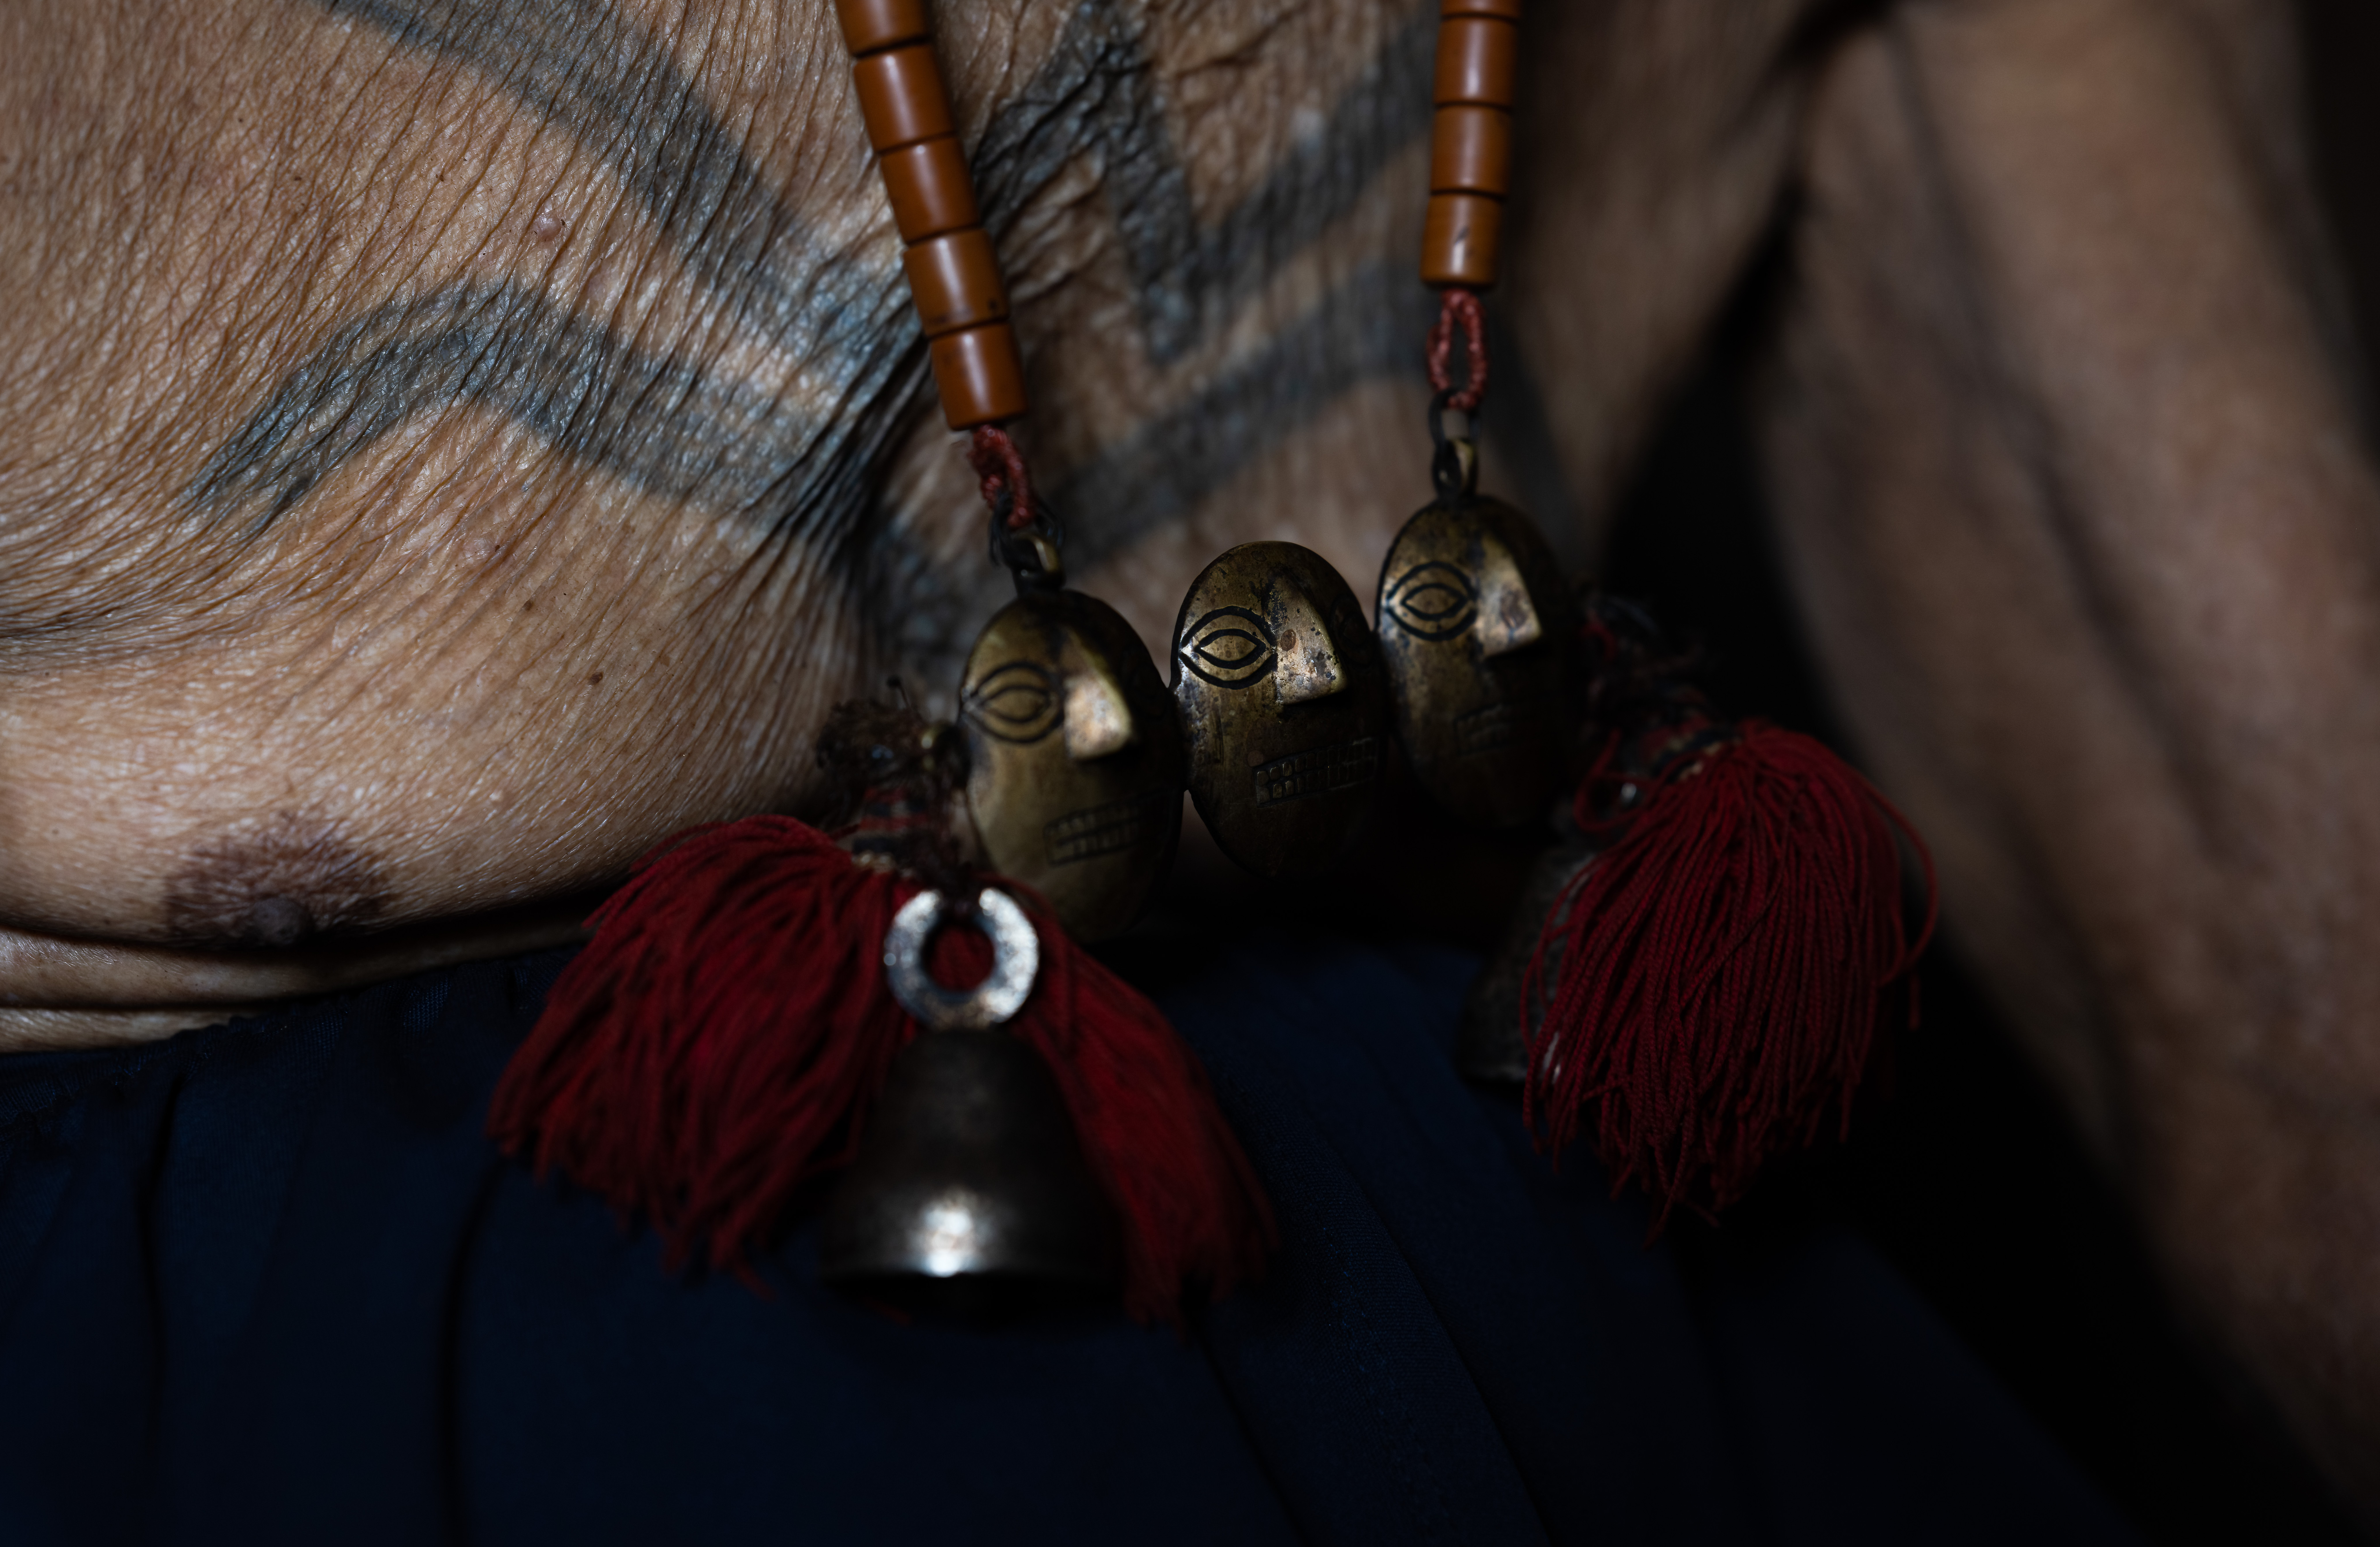 The bronze skulls worn on the necklaces are "earned" by successfully capturing the head of an enemy in battle.